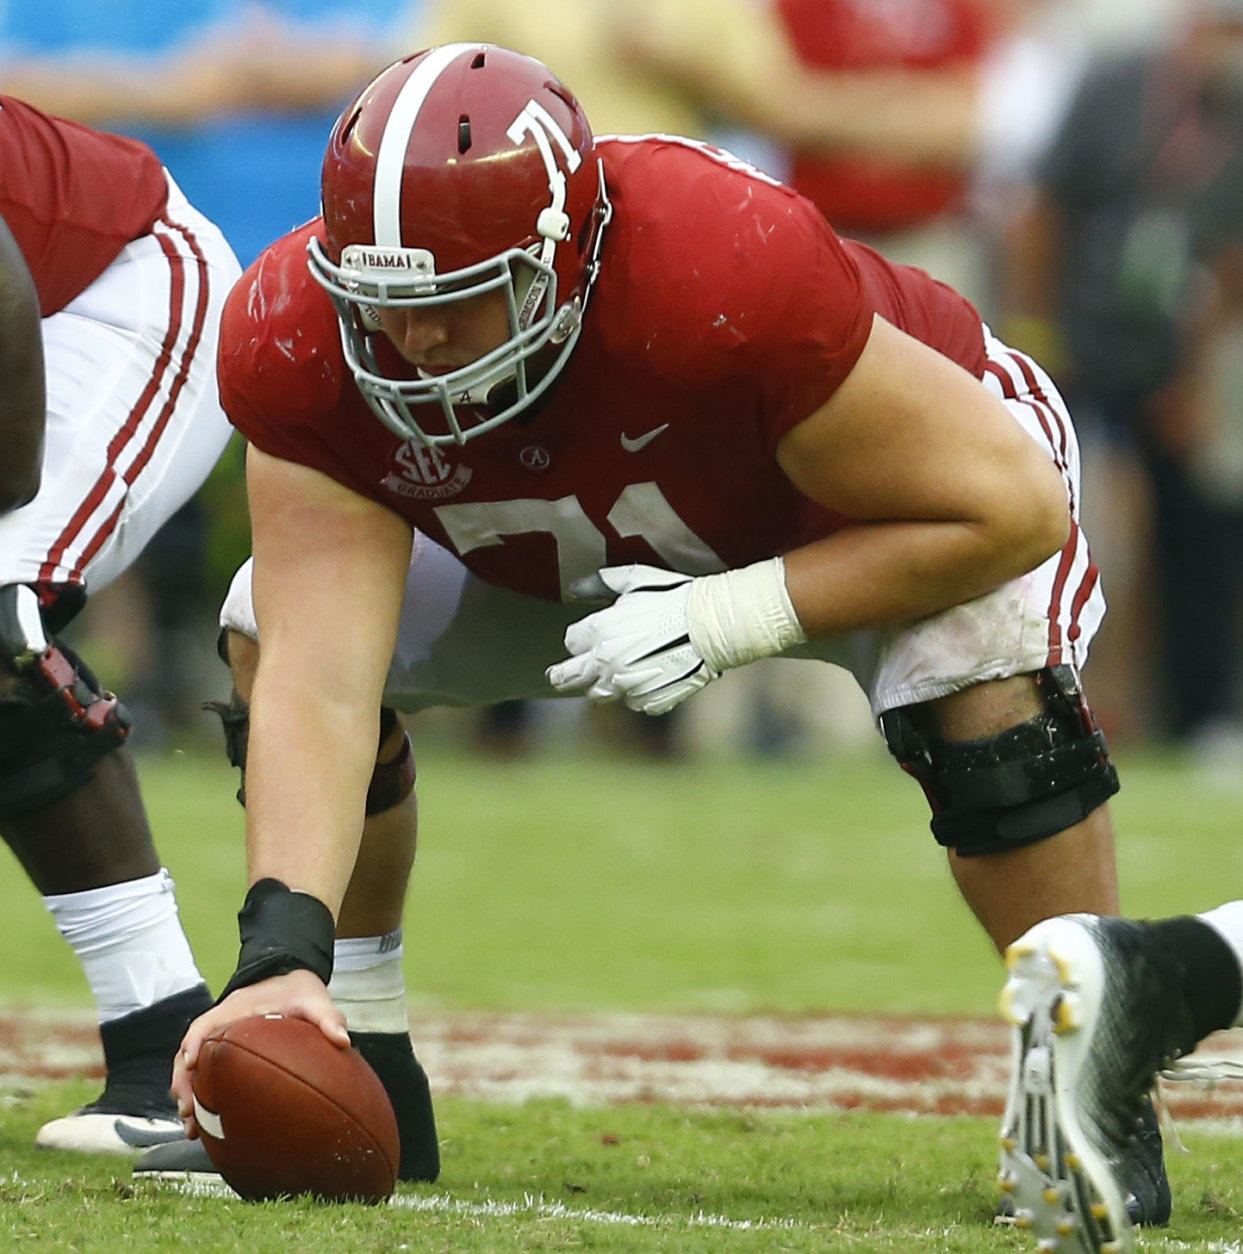 Alabama offensive lineman Ross Pierschbacher (71) lines up for the play against Texas A&amp;M during the second half of an NCAA college football game, Saturday, Sept. 22, 2018, in Tuscaloosa, Ala. (AP Photo/Butch Dill)